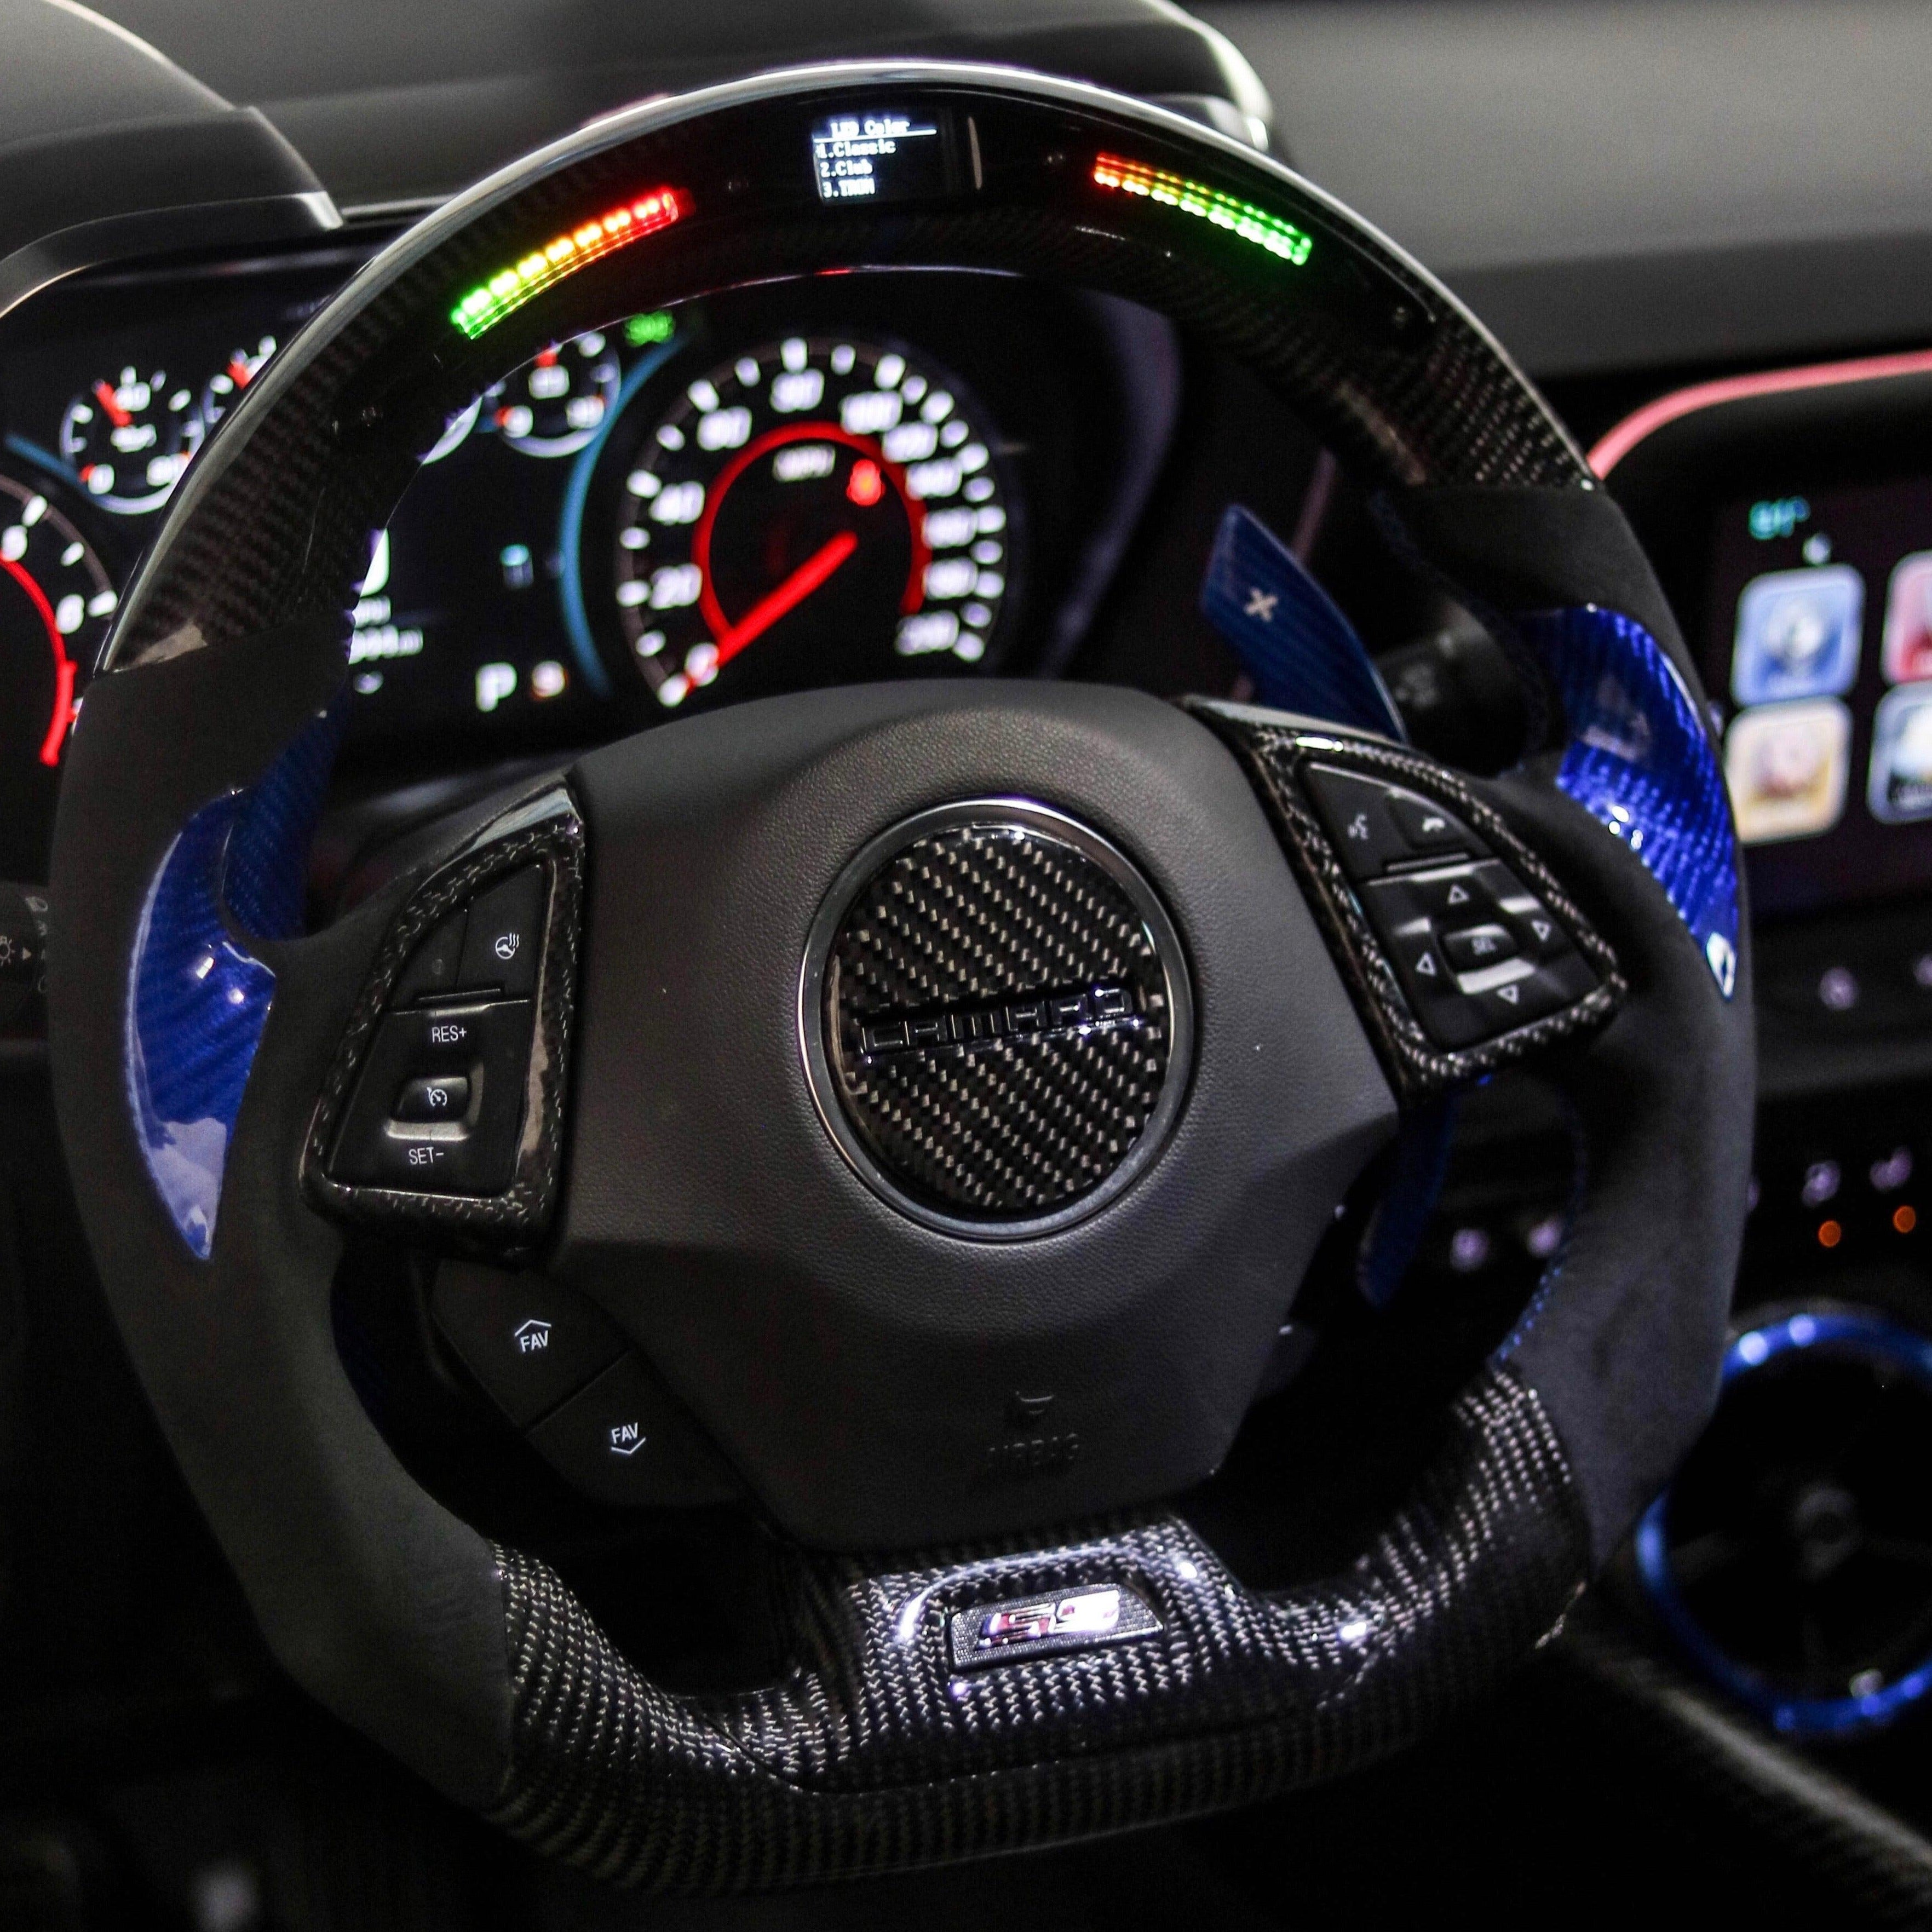 [Complete/Heated] Custom Carbon Fiber Steering Wheel For 2016-2024 Chevy Camaro - carbonaddons Carbon Fiber Parts, Accessories, Upgrades, Mods